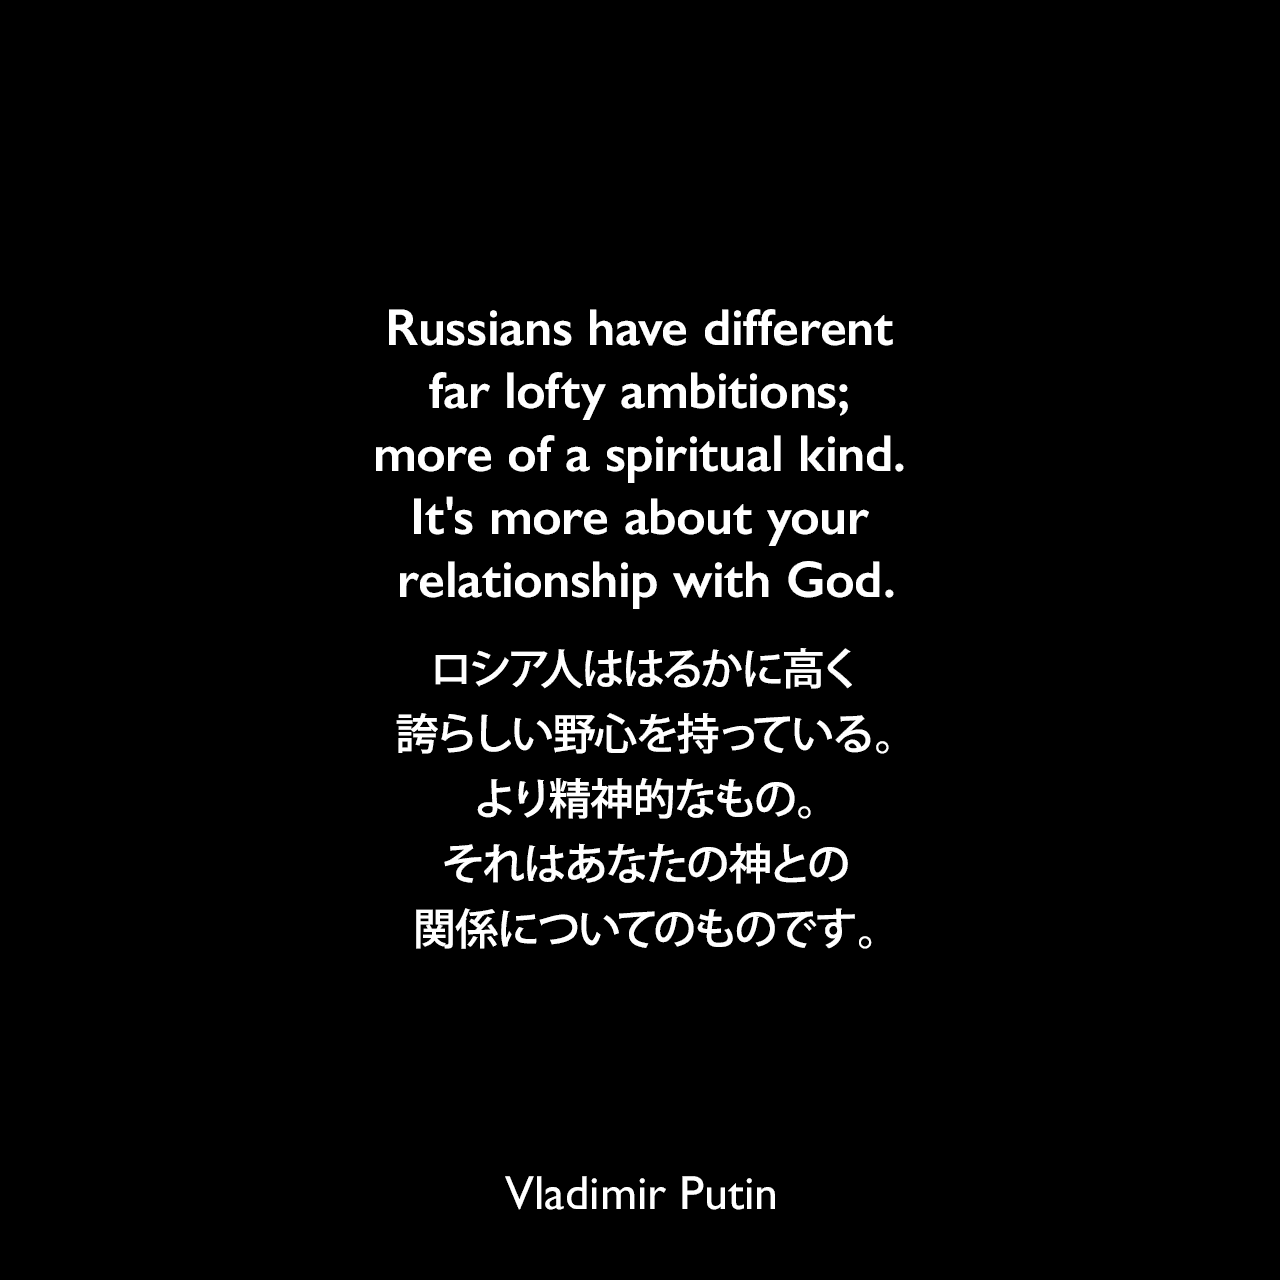 Russians have different far lofty ambitions; more of a spiritual kind. It's more about your relationship with God.ロシア人ははるかに高く誇らしい野心を持っている。より精神的なもの。それはあなたの神との関係についてのものです。- 2013年6月Vladimir Putin